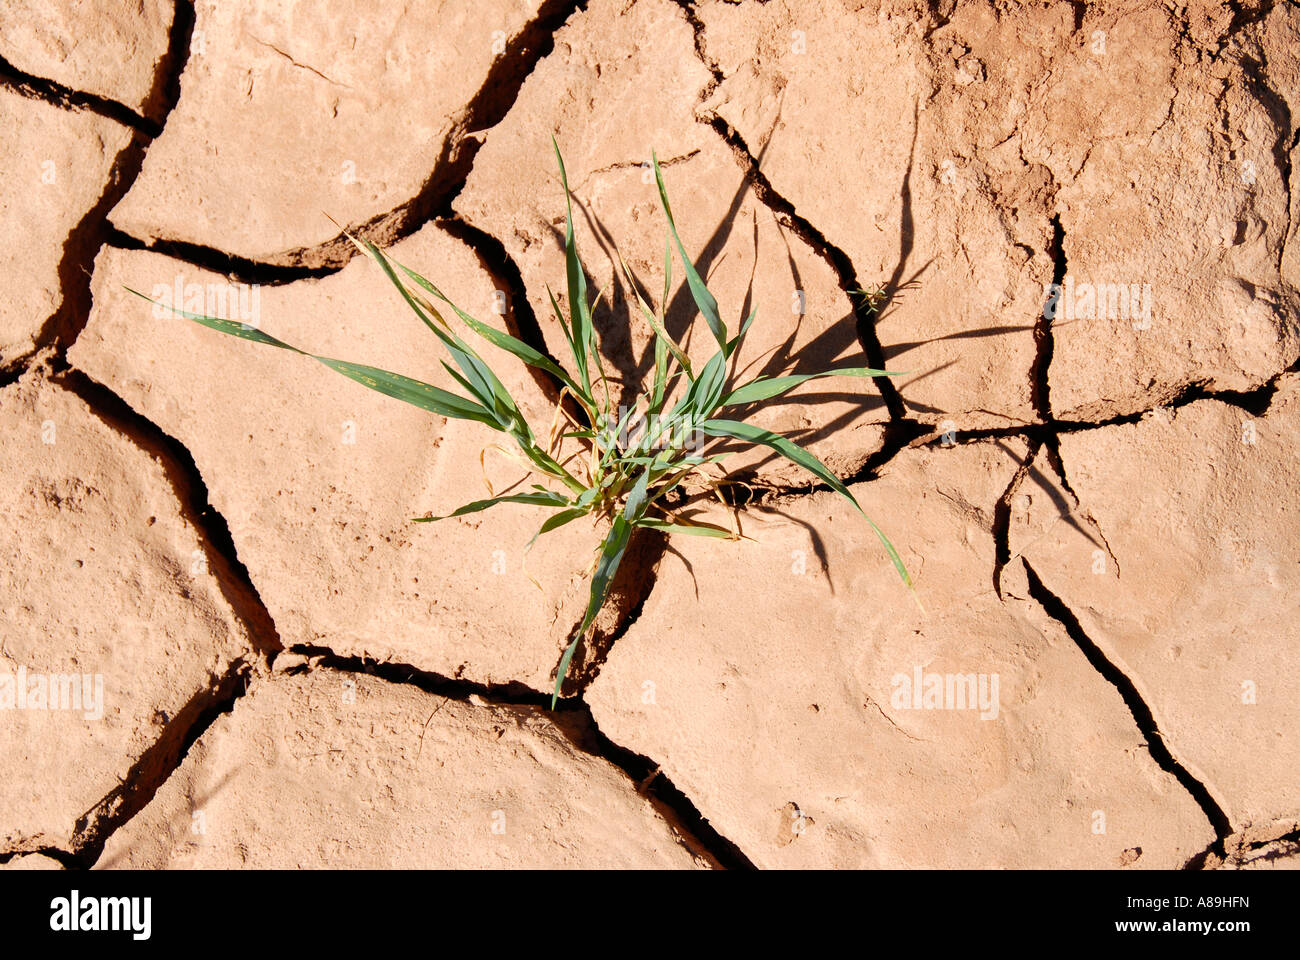 Green plant grows dry and torn open soil drought near Mhamid Morocco Stock Photo